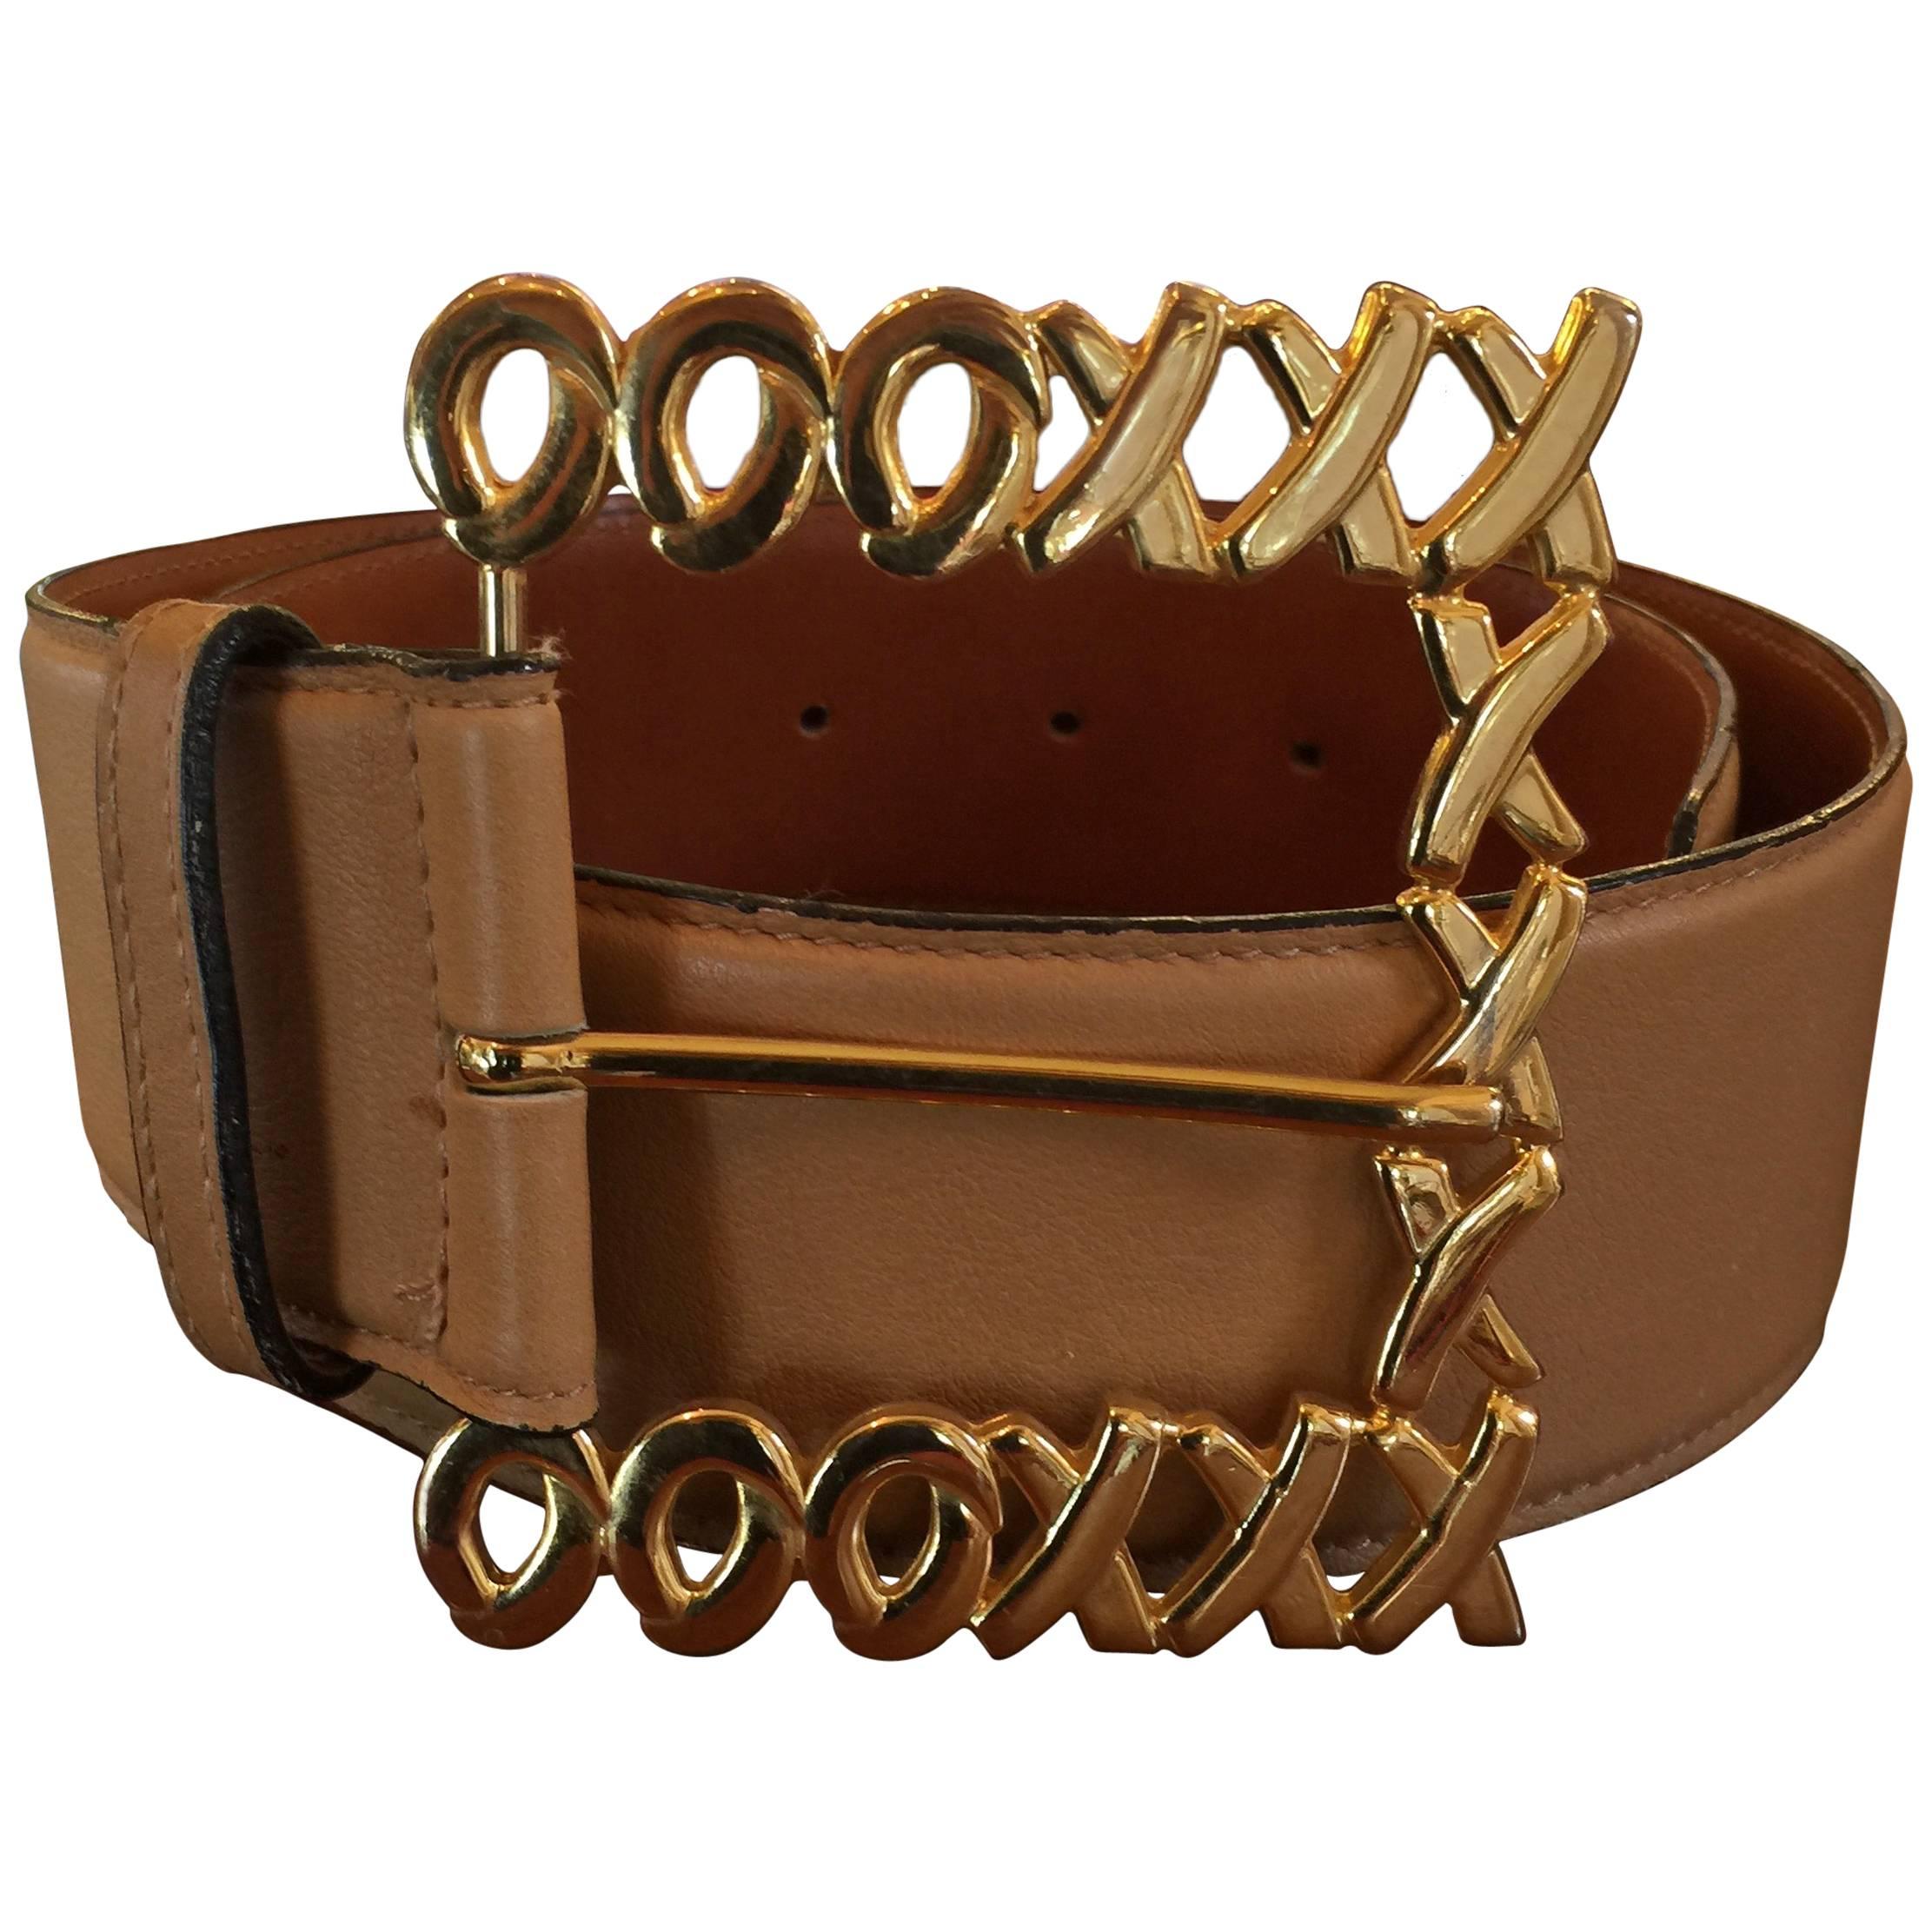 Paloma Picasso XXOXXO Leather Belt with Signature Goldtone Belt Buckle For Sale